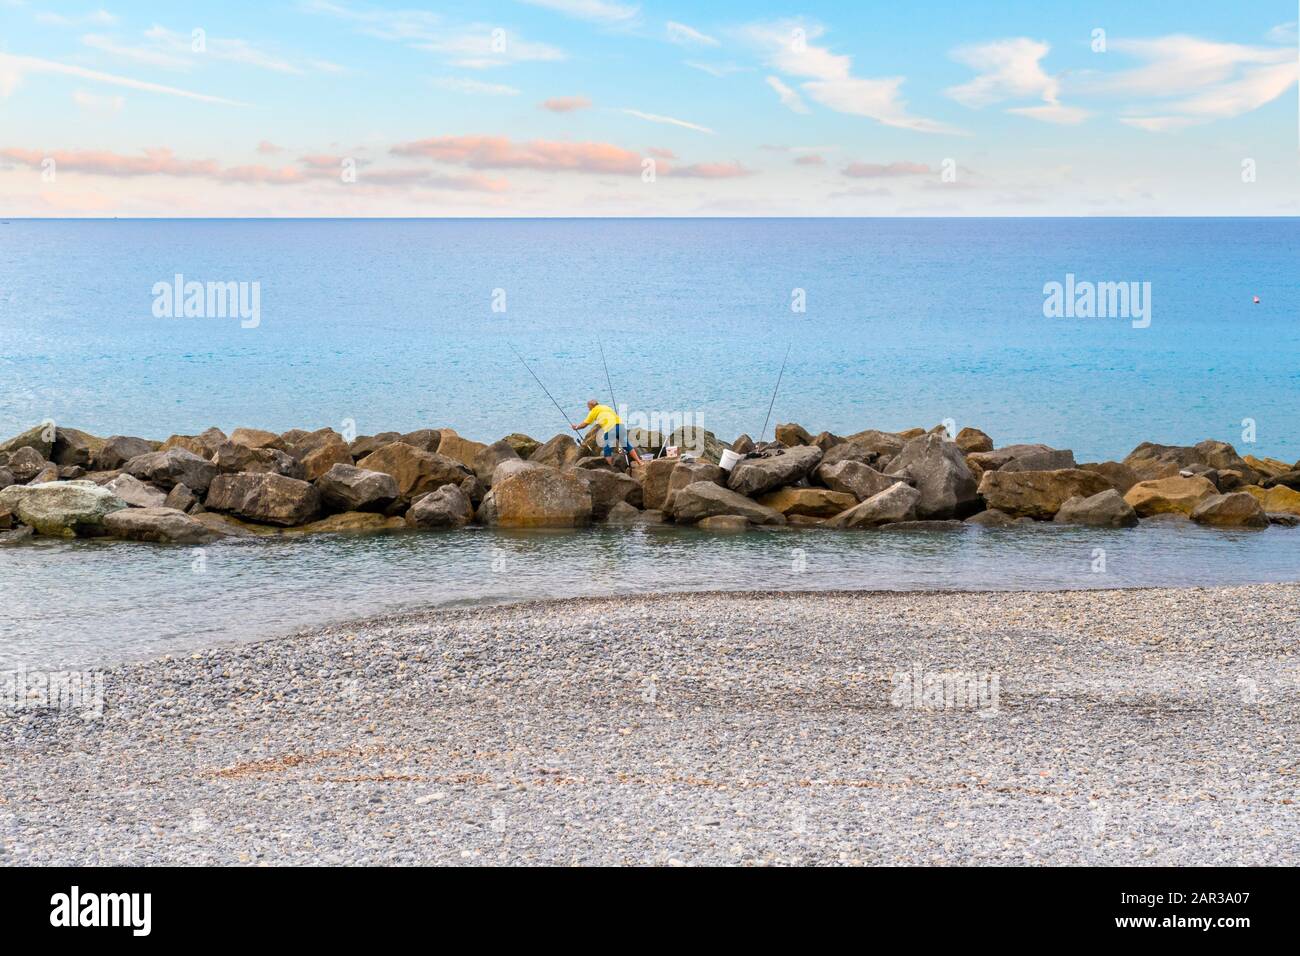 An Italian fisherman on the rocks at a pebble beach on the Mediterranean Sea at the town of Ventimiglia, Italy, on the Italian Riviera. Stock Photo